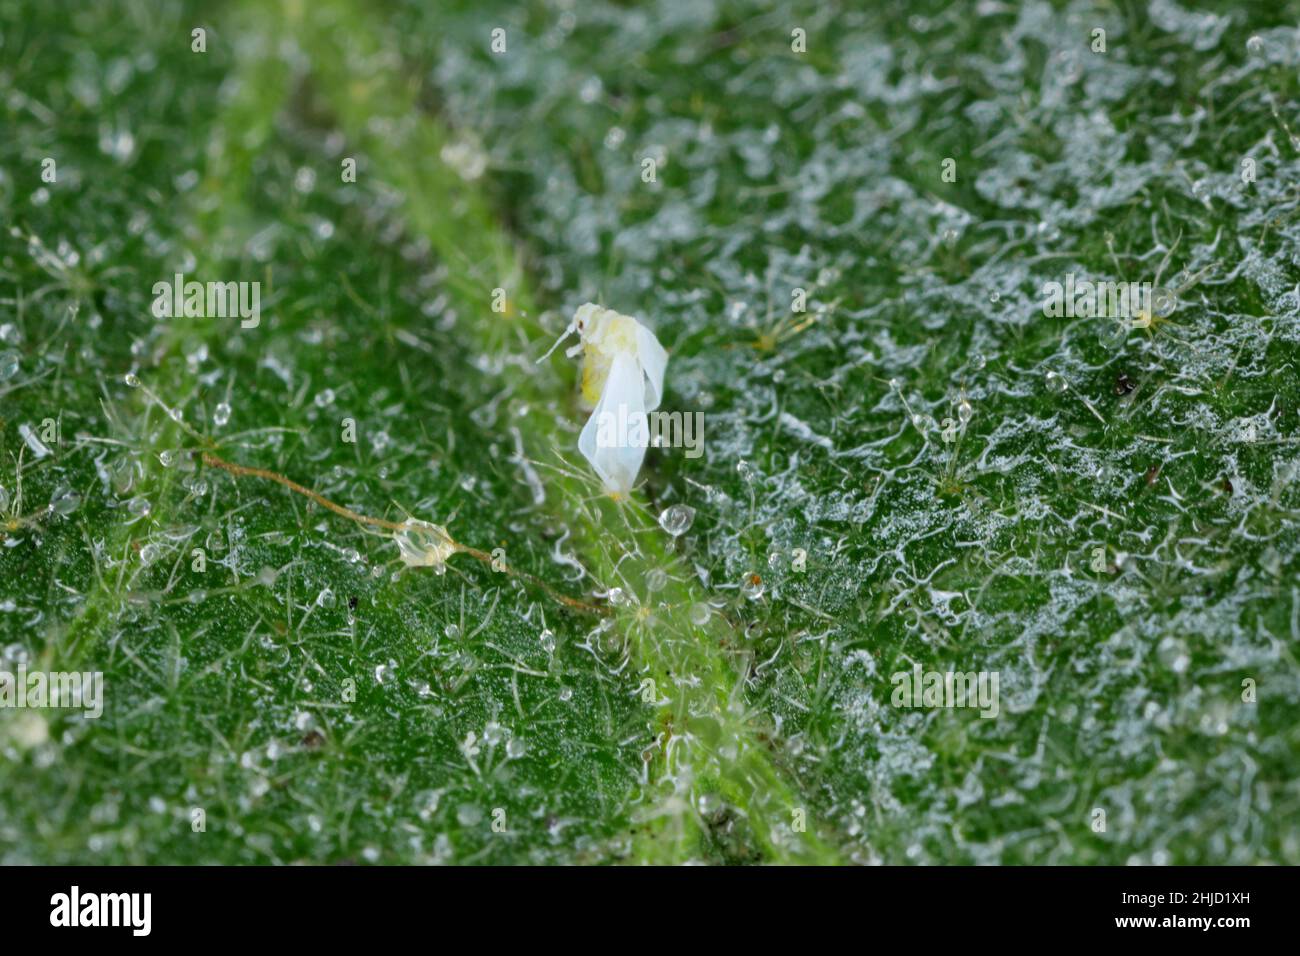 Silverleaf whitefly, Bemisia tabaci (Hemiptera: Aleyrodidae) killed by an insecticide made from natural oils on a leaf. Stock Photo